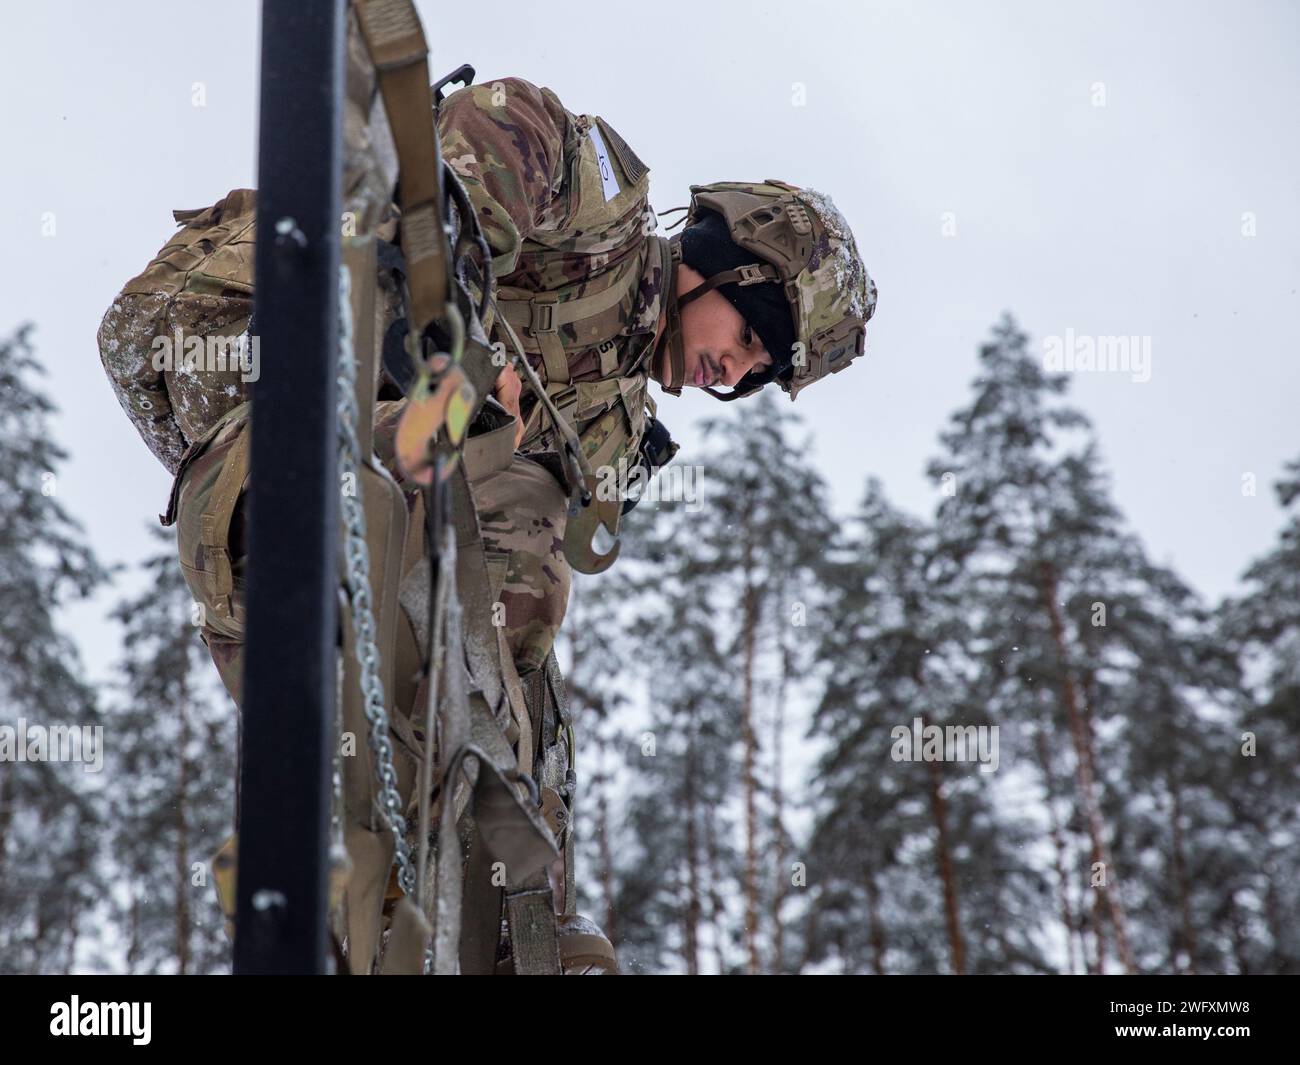 U.S. Army Spc. Jacob Serpas, an indirect fire infantryman with Headquarters and Headquarters “Hazard” Company, 2nd Battalion, 69th Armored Regiment “Panther Battalion,” 2nd Armored Brigade Combat Team, 3rd Infantry Division, climbs over an obstacle during the Croatian “Winter Challenge” at Bemowo Piskie Training Area, Poland, Jan. 5, 2024. The Croatian “Winter Challenge” is a 15-kilometer competition consisting of seven events: land navigation, small arms firing, wall climbing, obstacle course while wearing a gas mask, rope crossing, low-crawl and obstacle climbing, and a hand grenade toss. U. Stock Photo